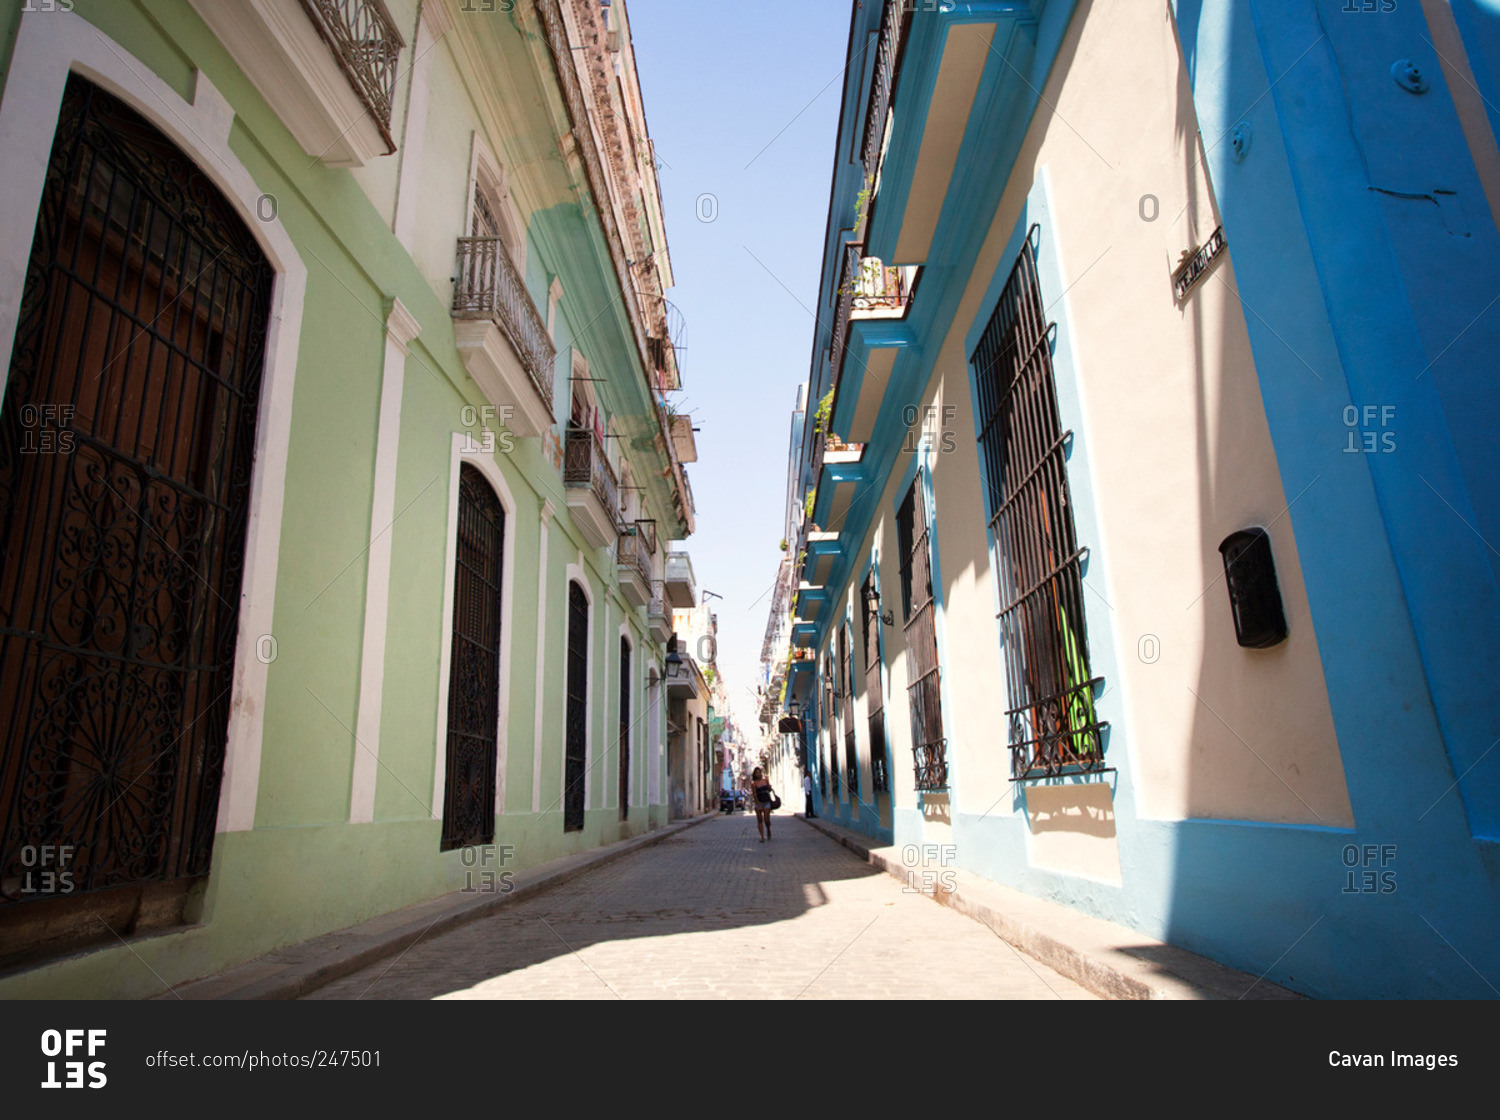 Woman walking down narrow alley with green and blue painted buildings on either side